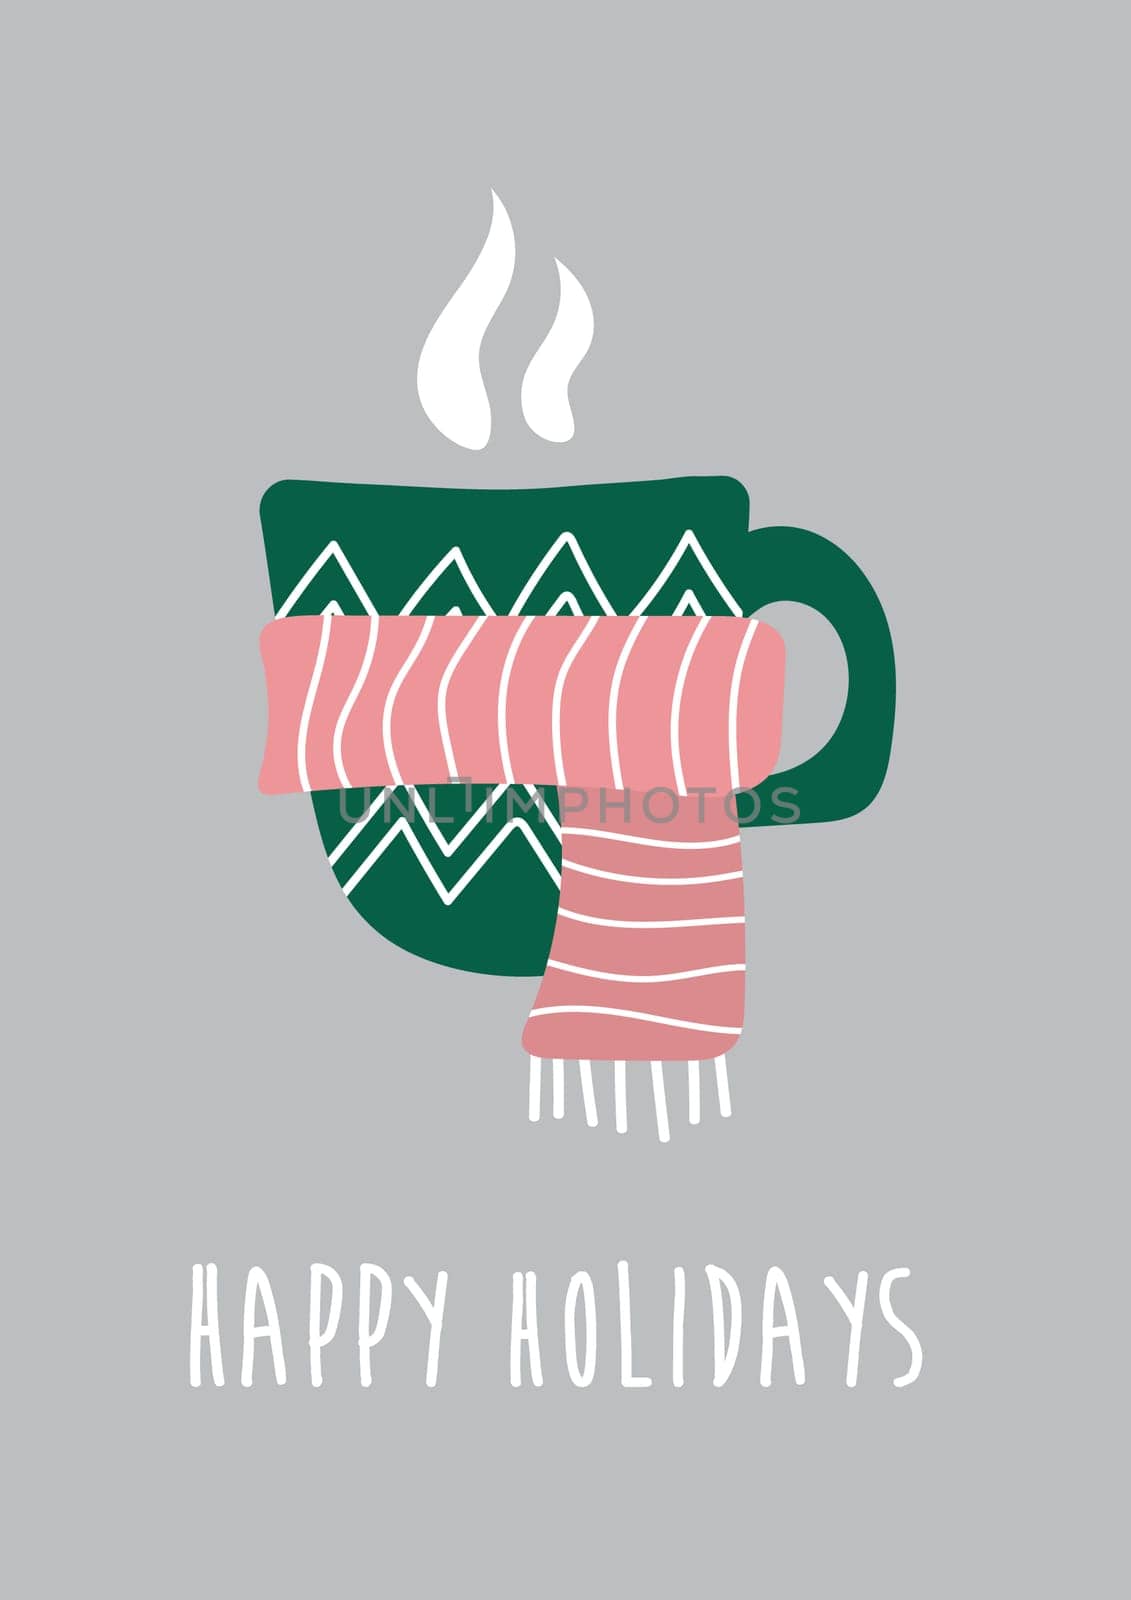 Hot drink in a winter mug wrapped in warm knitted scarf. Holiday card template with happy holidays text. Flat style vector cartoon illustration.